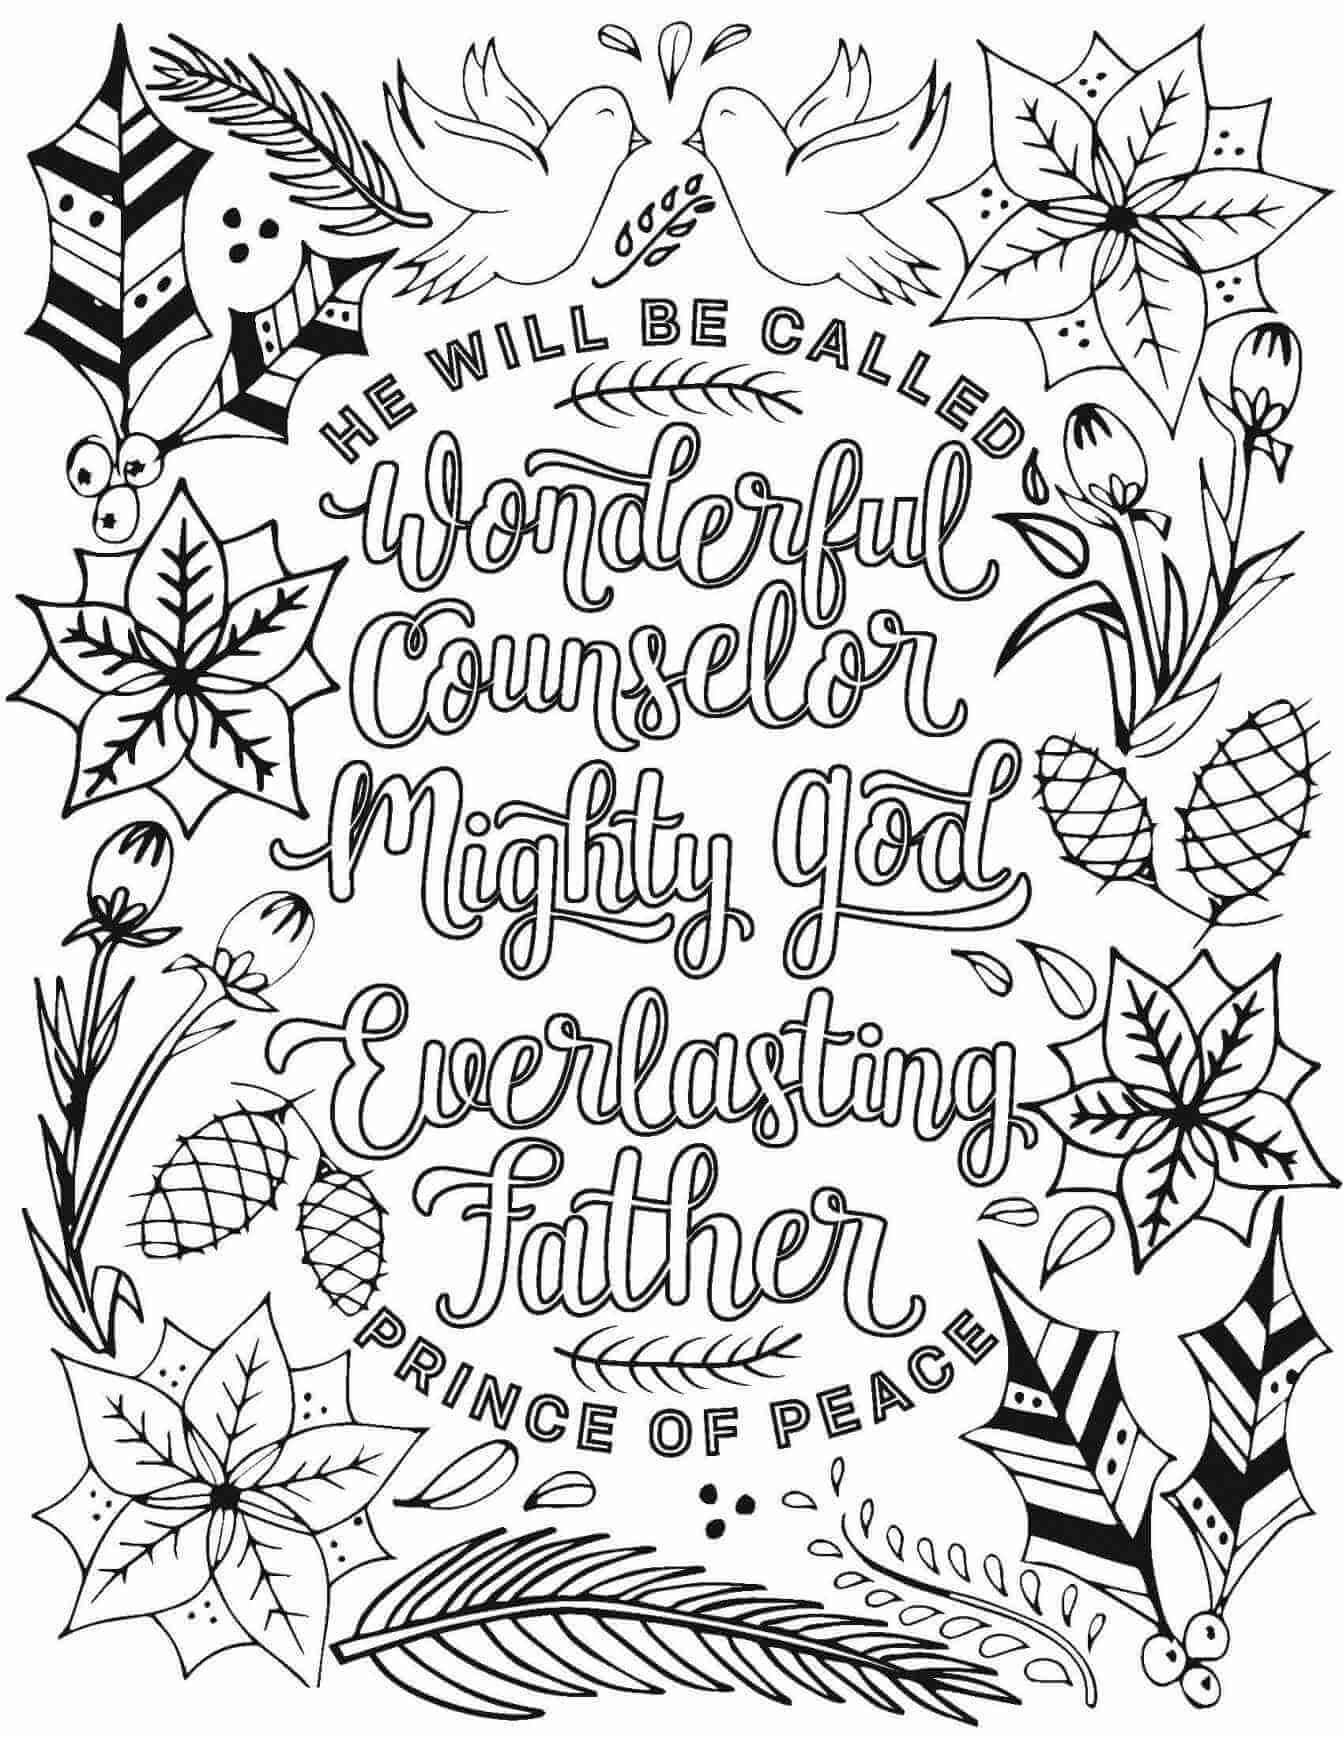 Prince of Peace Christmas Coloring Pages for Adults